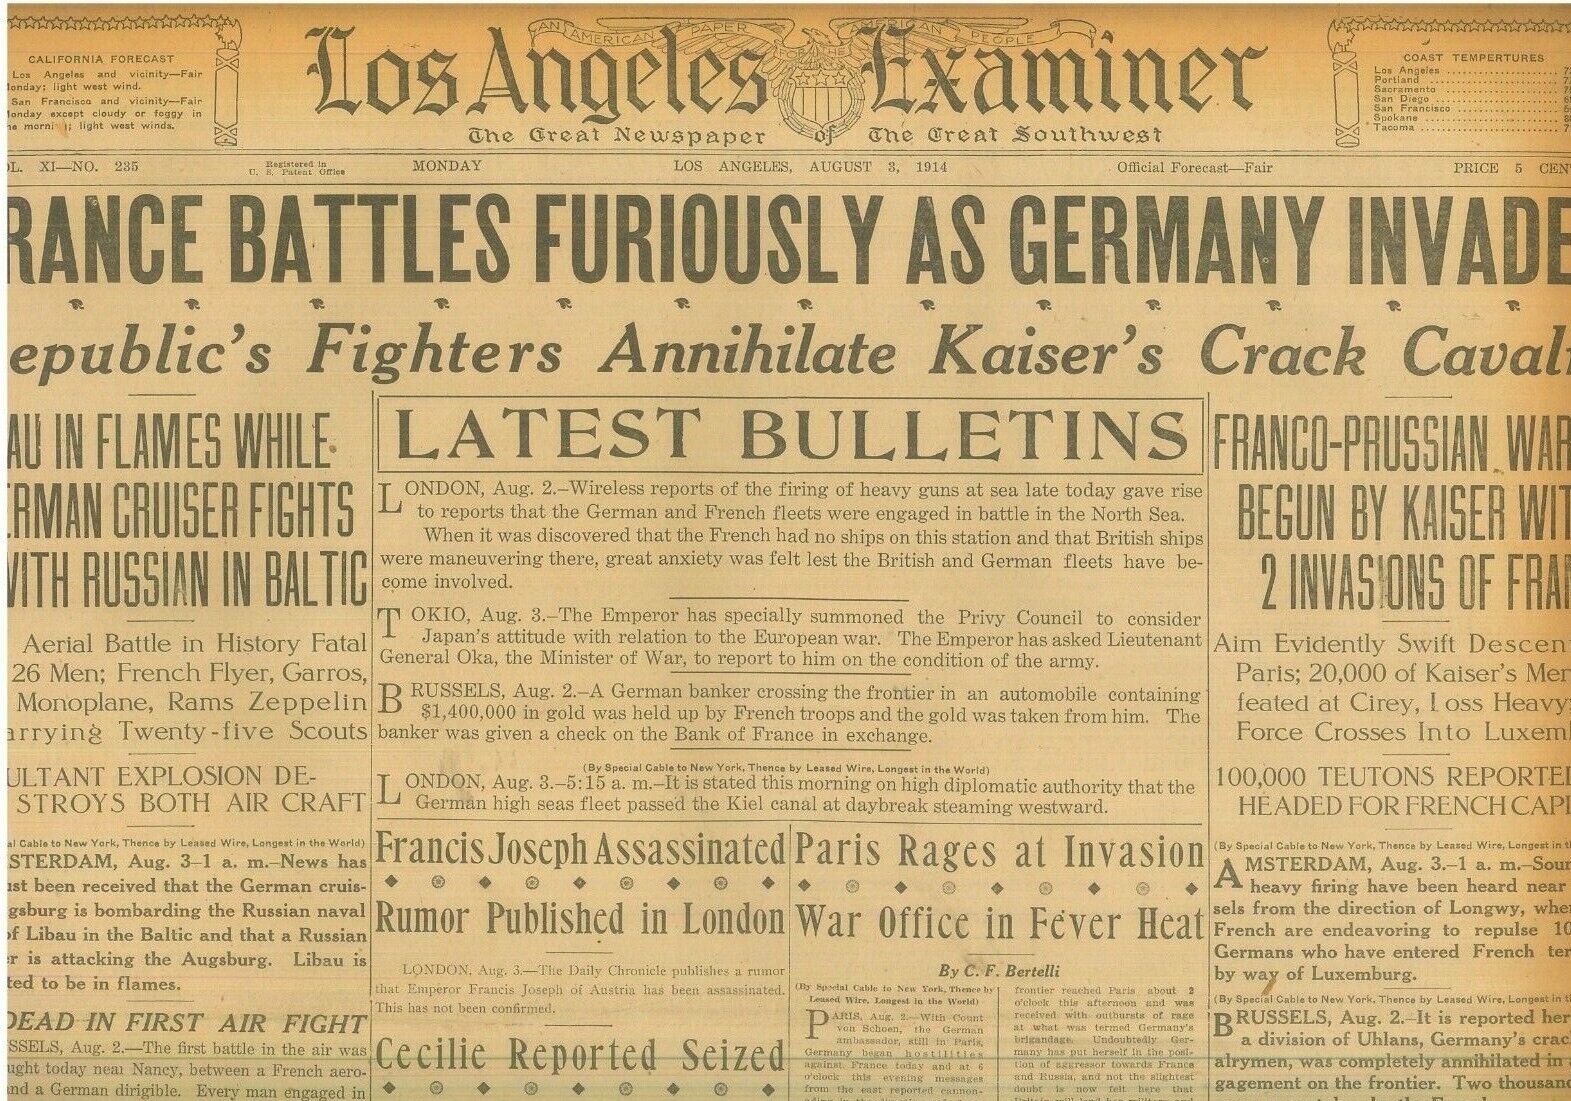 War in Europe Germany Invades France First Aerial Battle 26 Dead August 3 1914